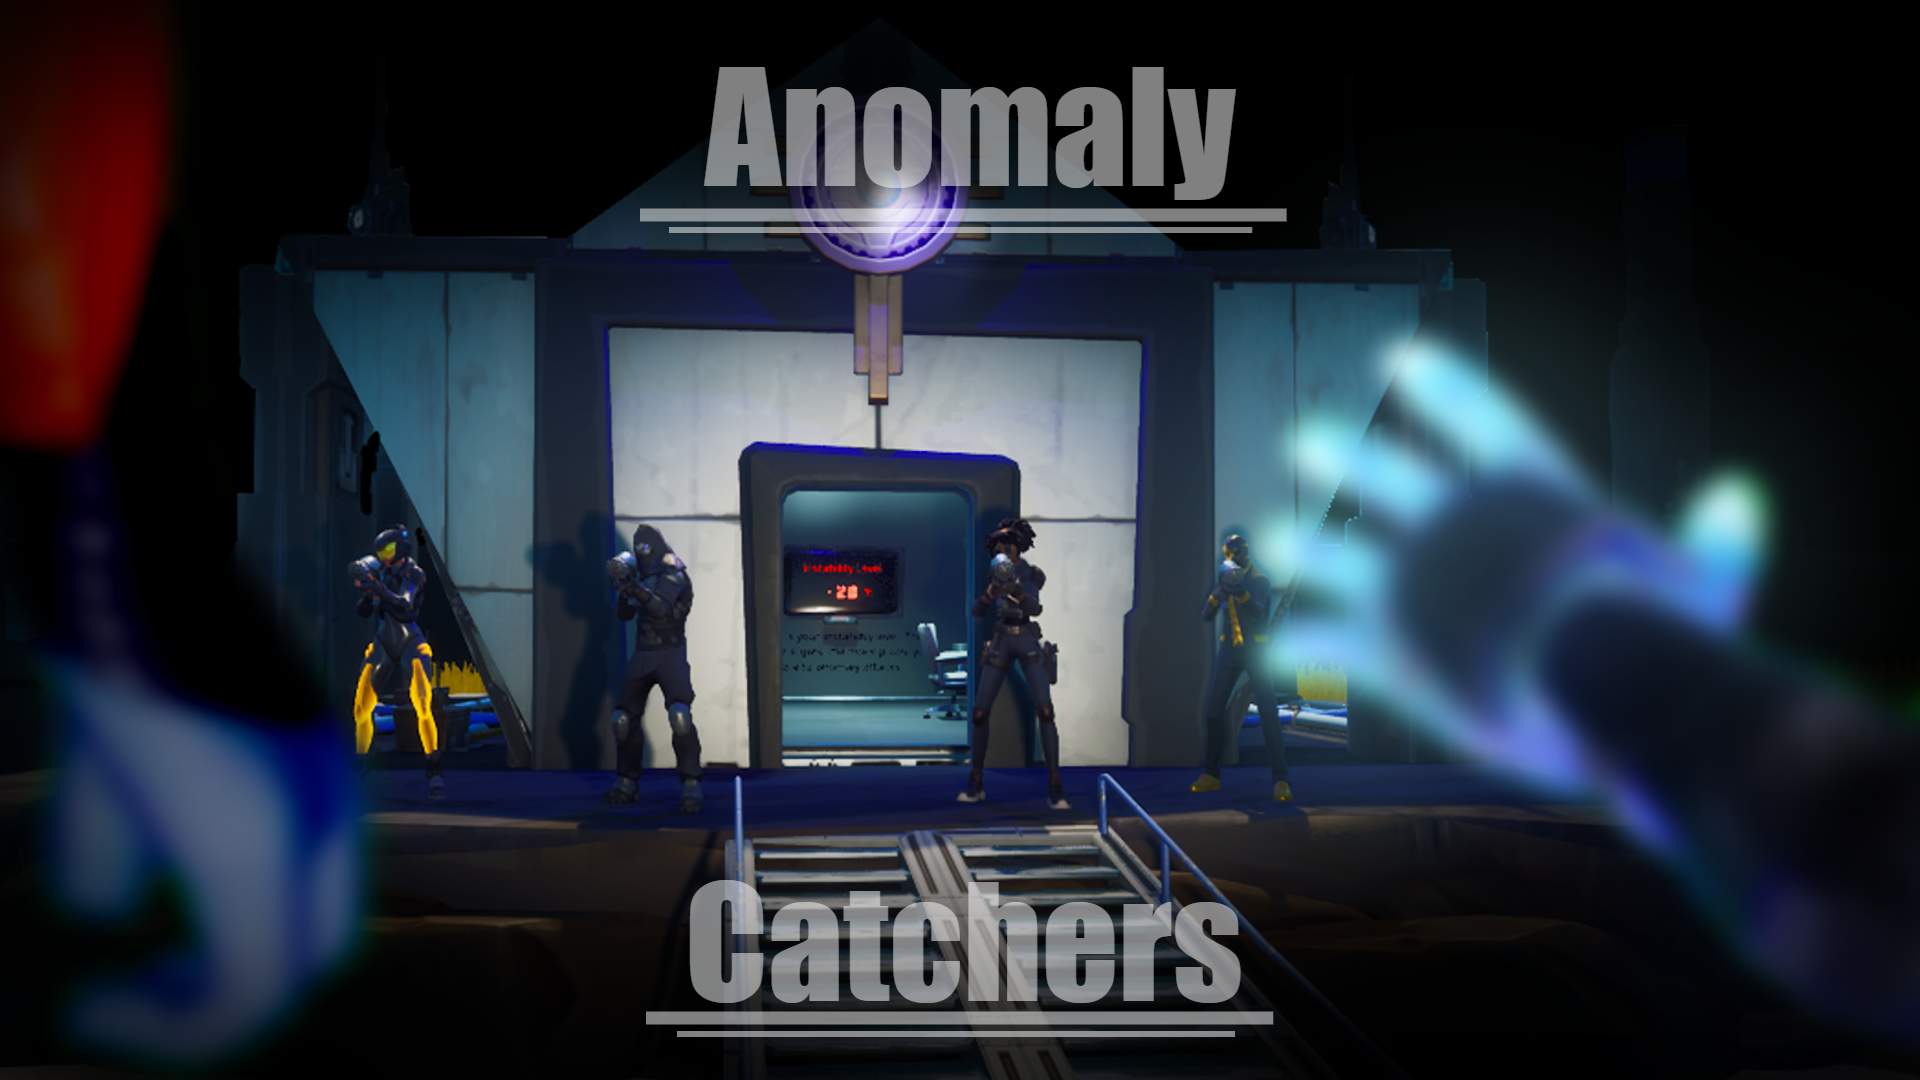 ANOMALY CATCHERS - VIEW HARBOUR HOUSE